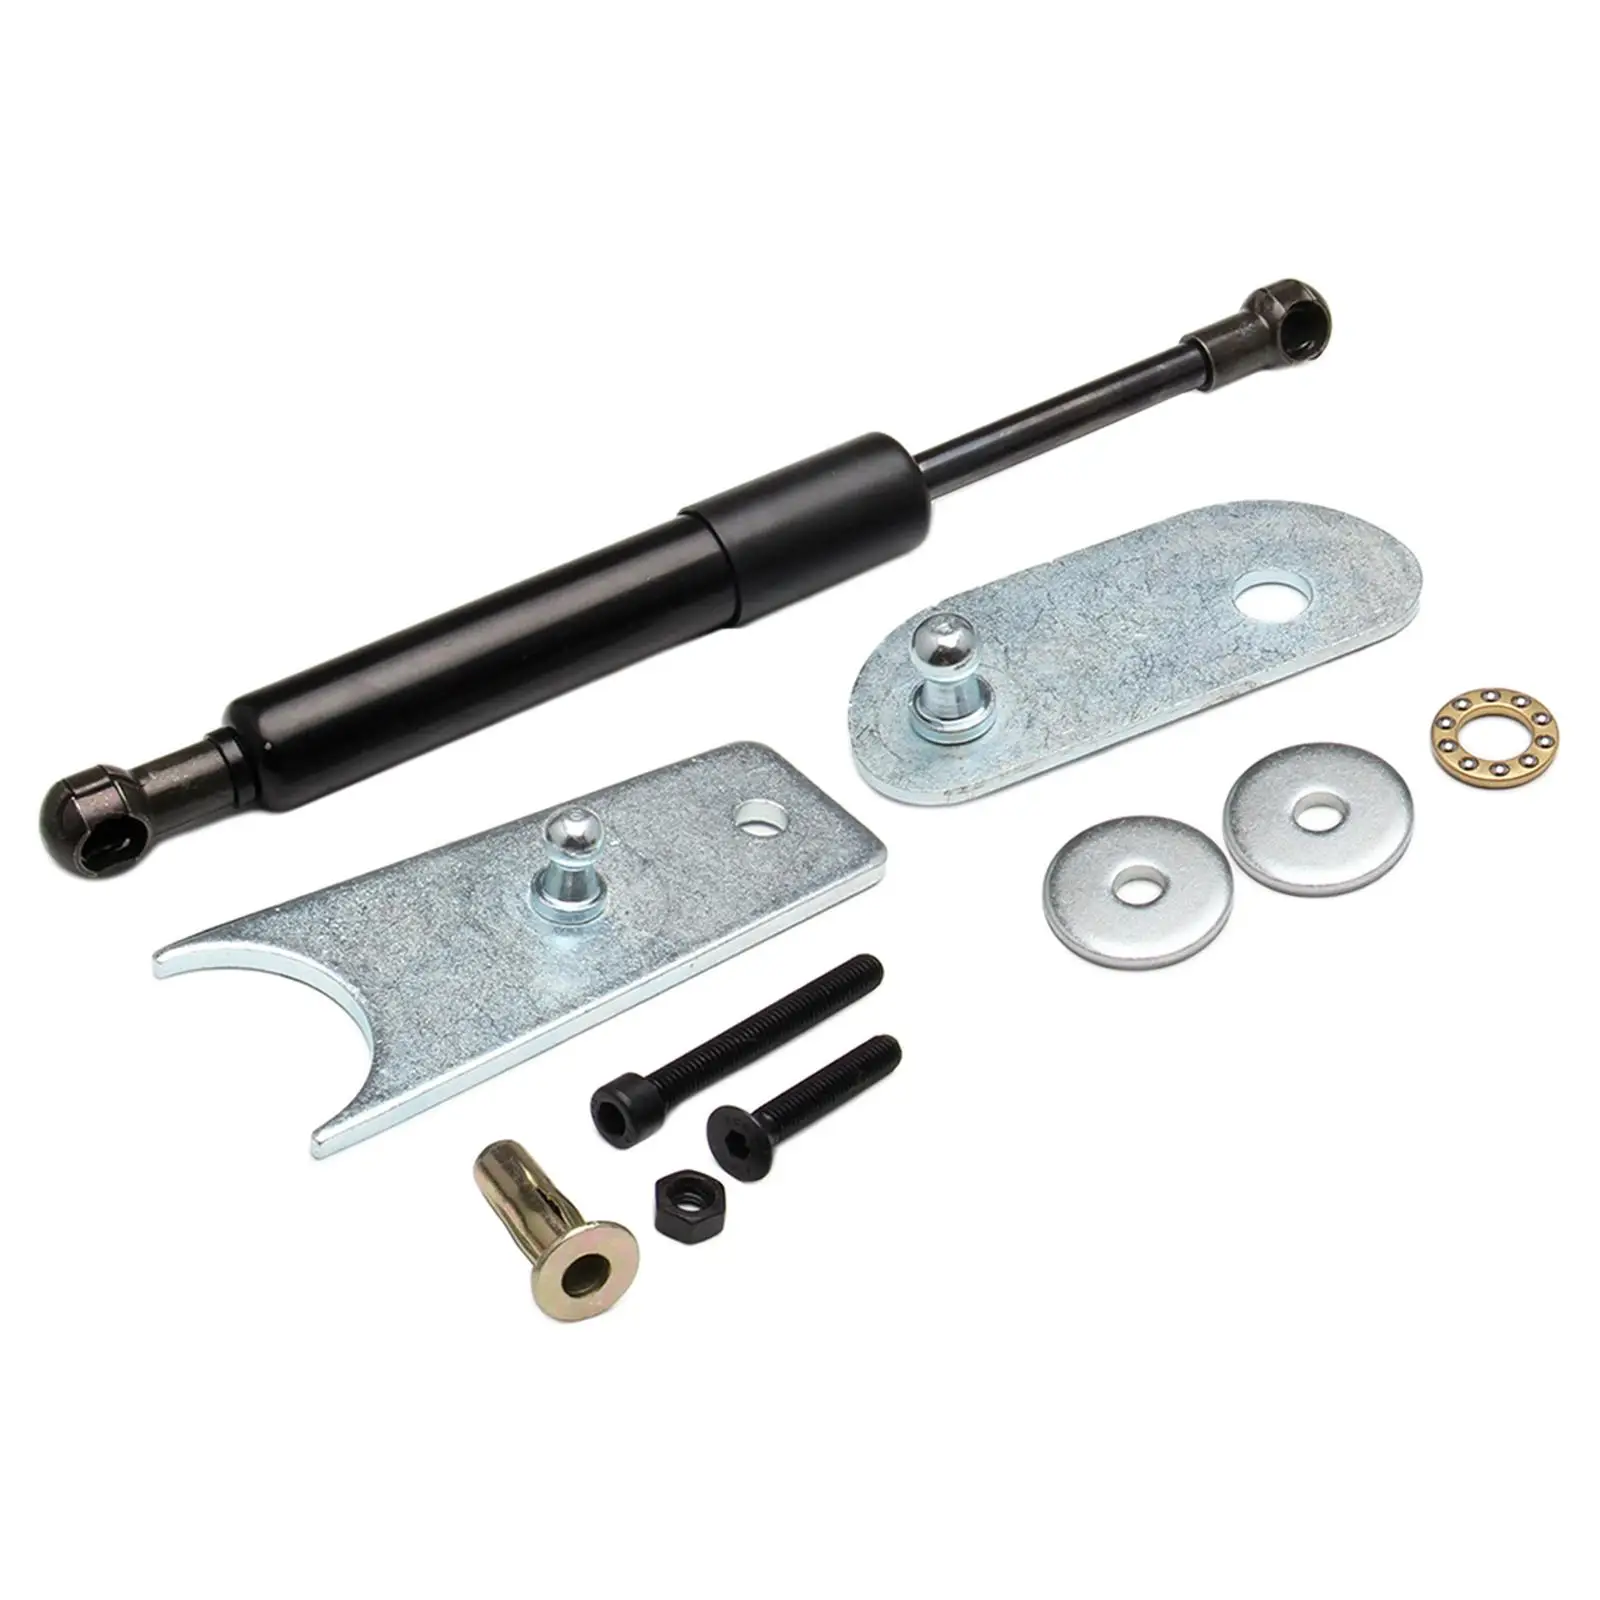 TS-SIL07 Trunk Tailgate Assist Shock Strut Lift Support w/ Accessories Fit for Chevrolet /